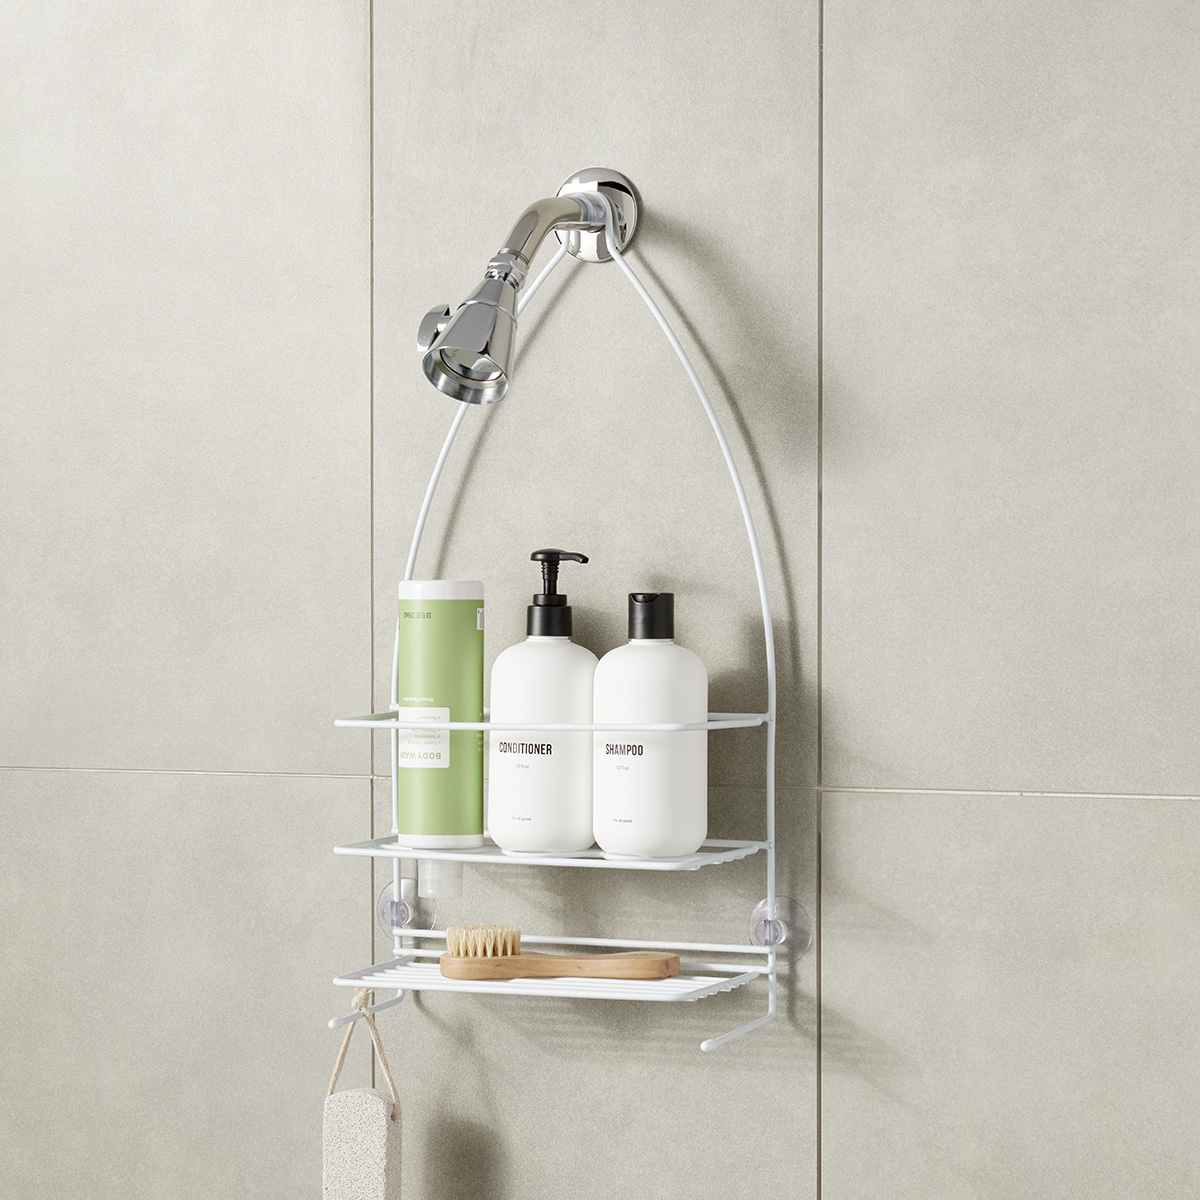 https://www.containerstore.com/catalogimages/443787/10077508_ultra_shower_caddy_white_PV.jpg